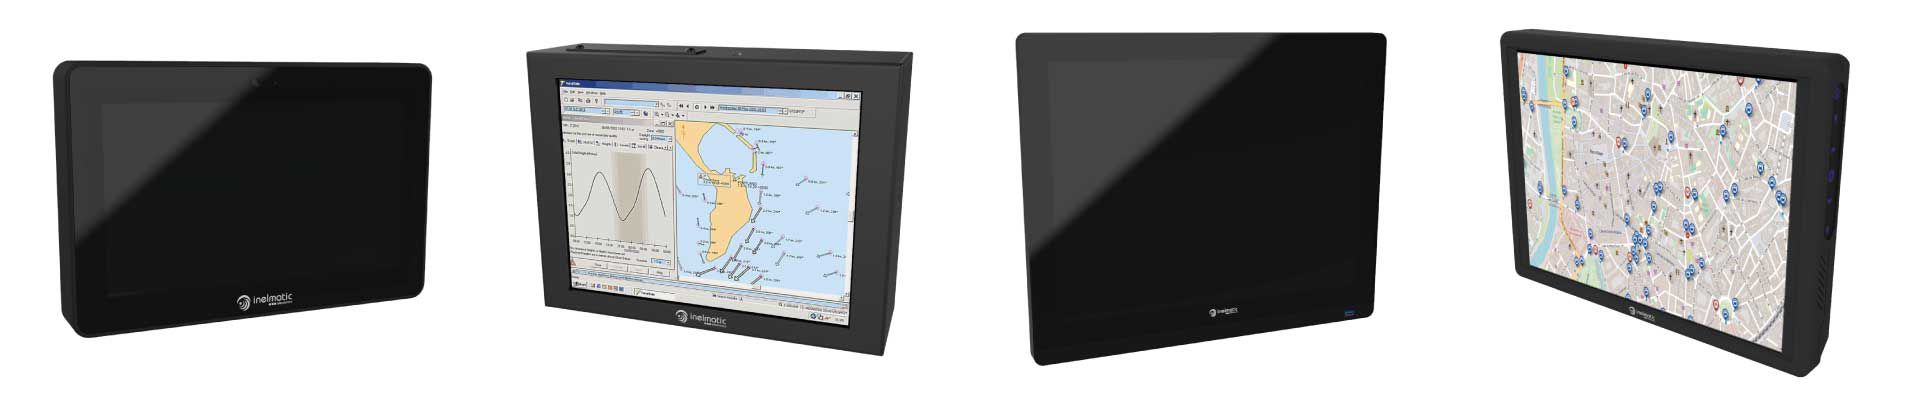 Rugged metal frame monitors with CPU - Inelmatic